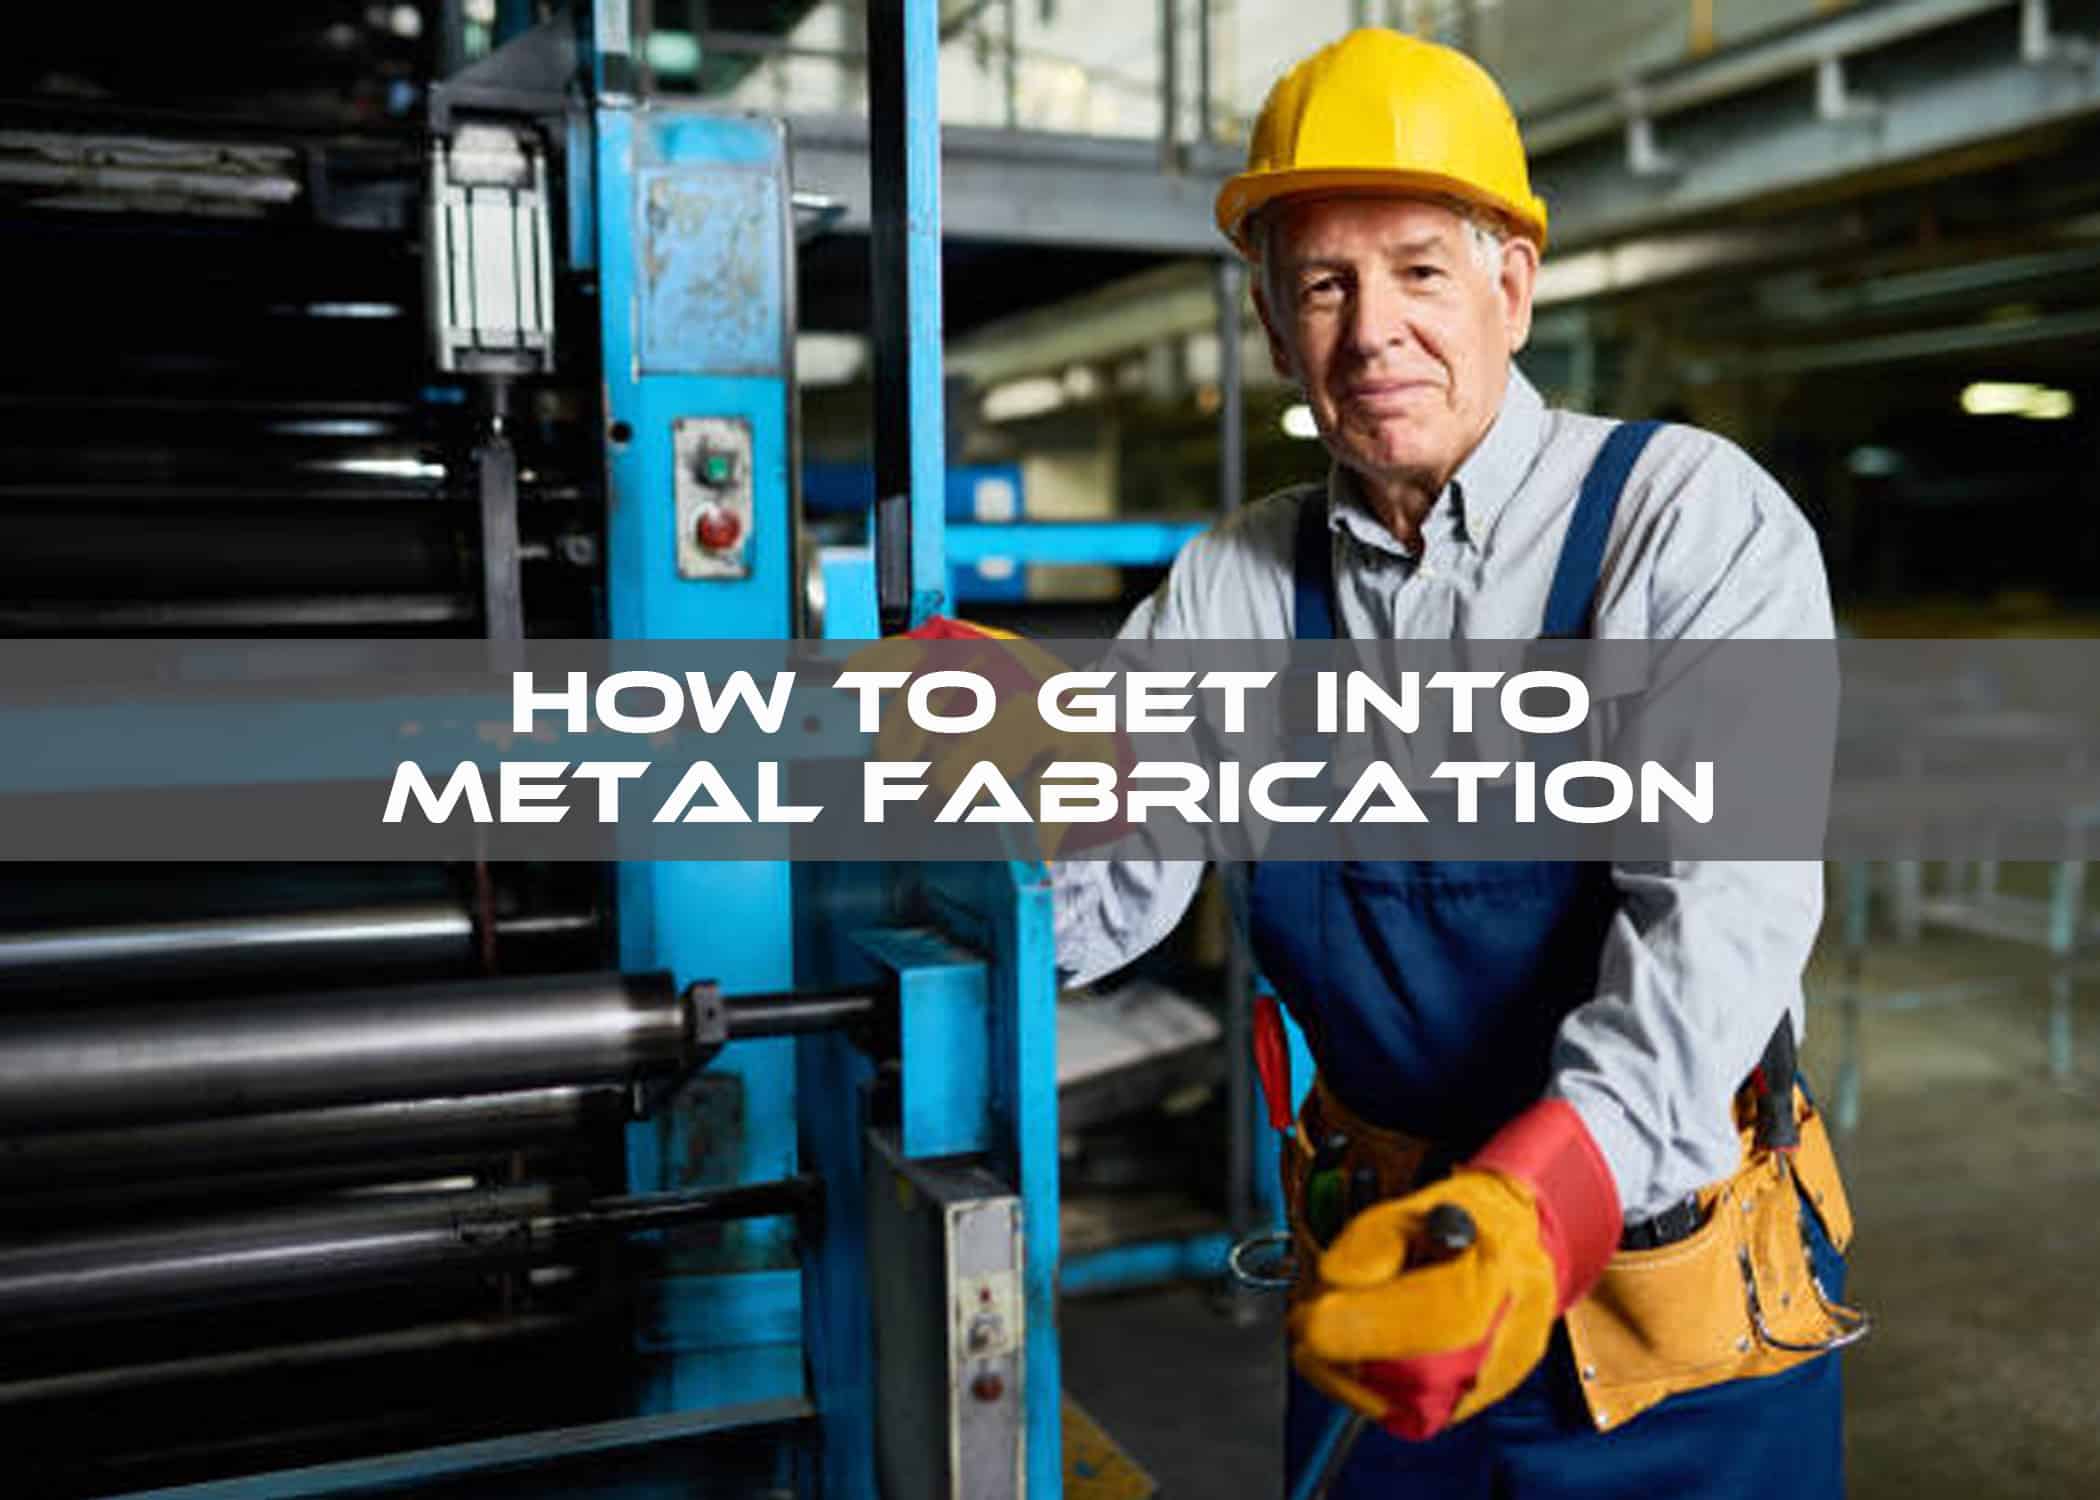 How to Get into Metal Fabrication